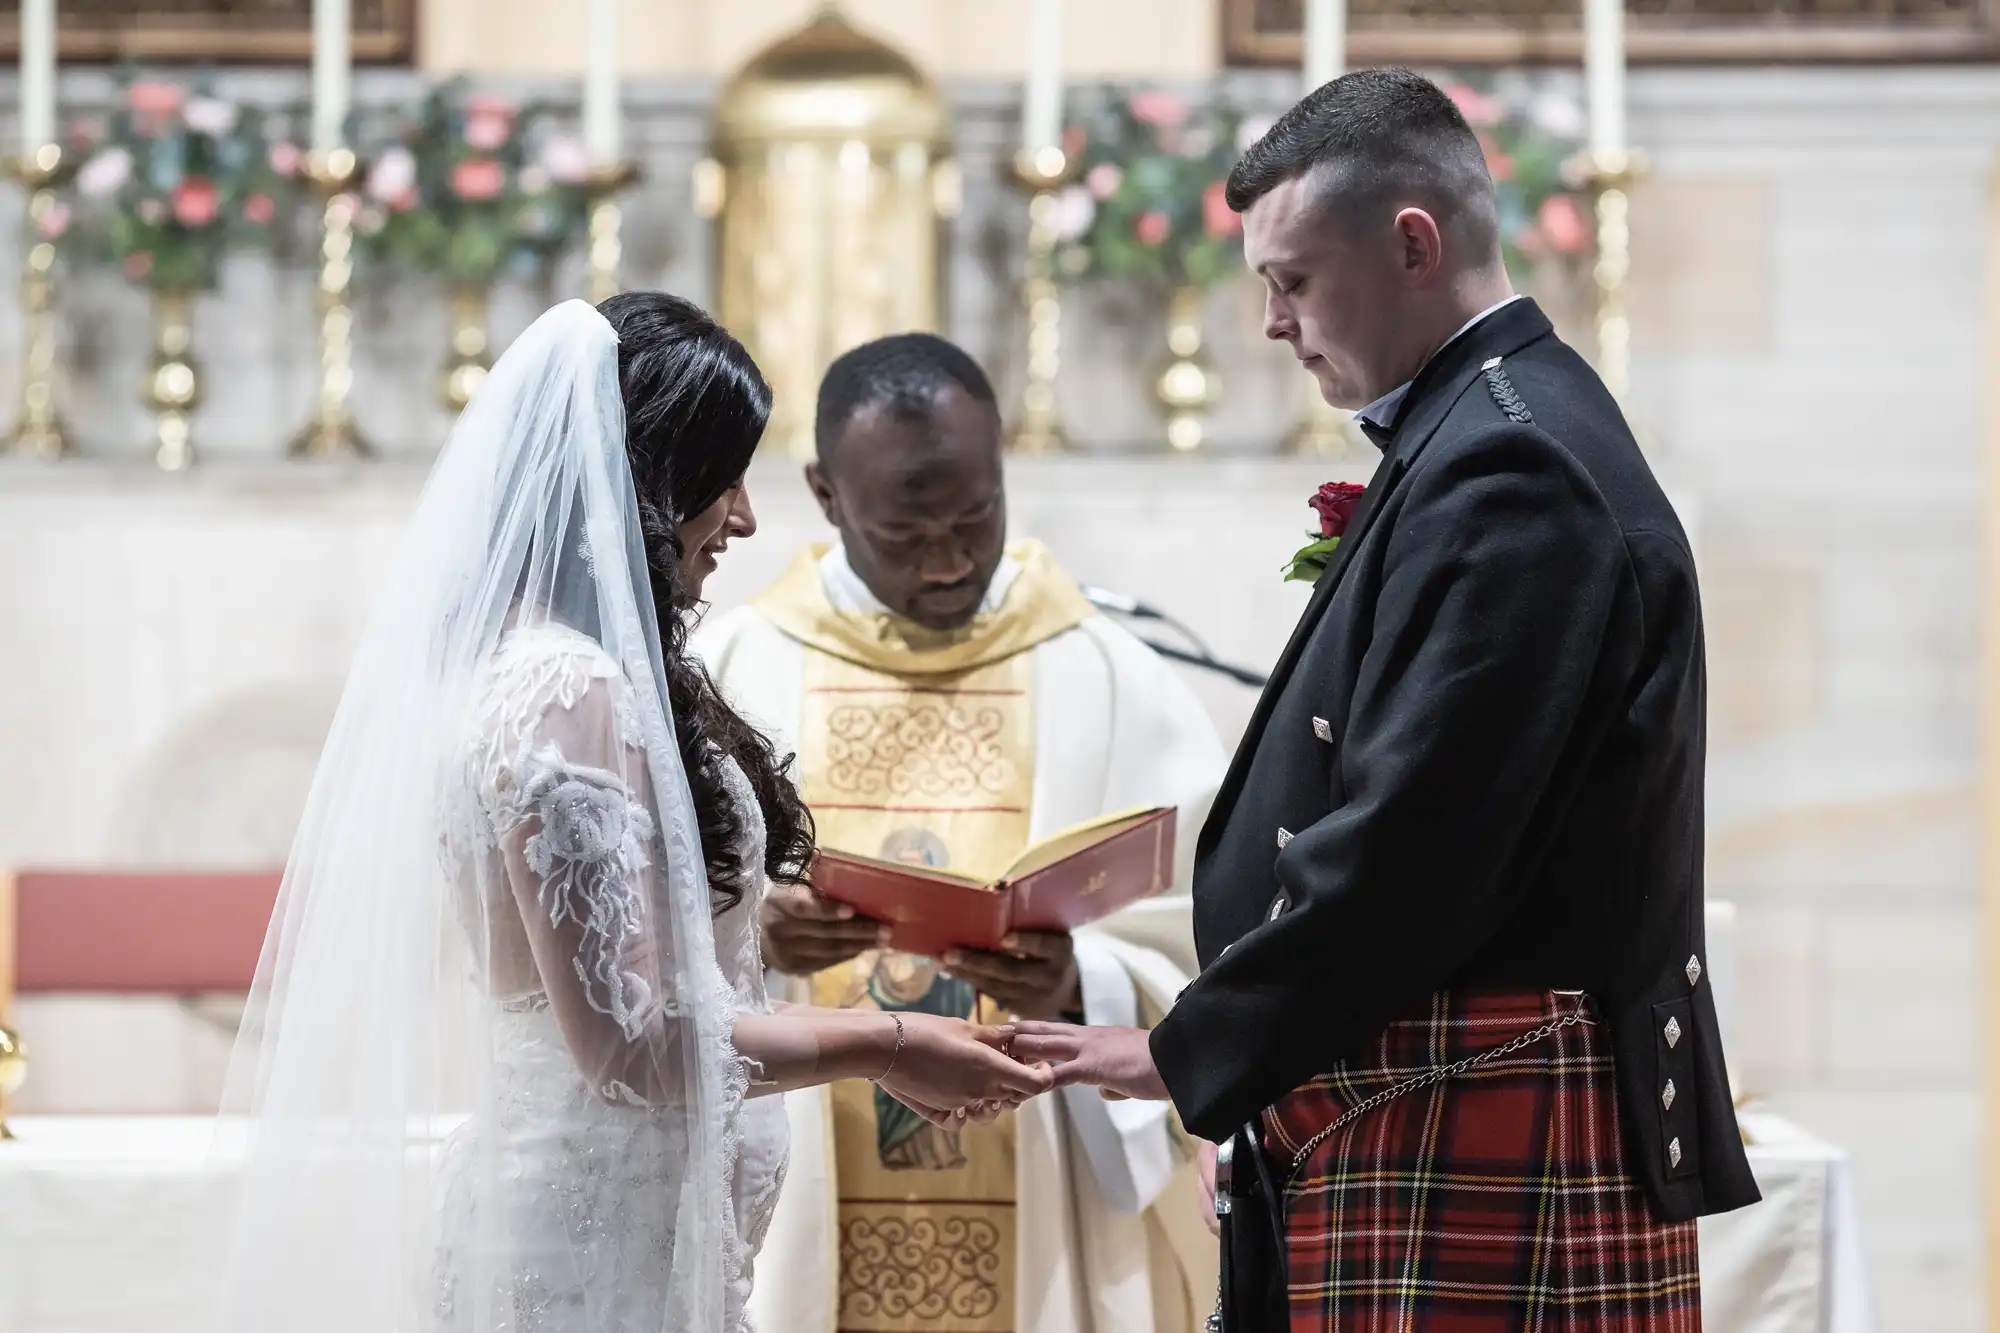 A bride in a white gown and a groom in a kilt holding hands during a wedding ceremony officiated by a priest in a church.